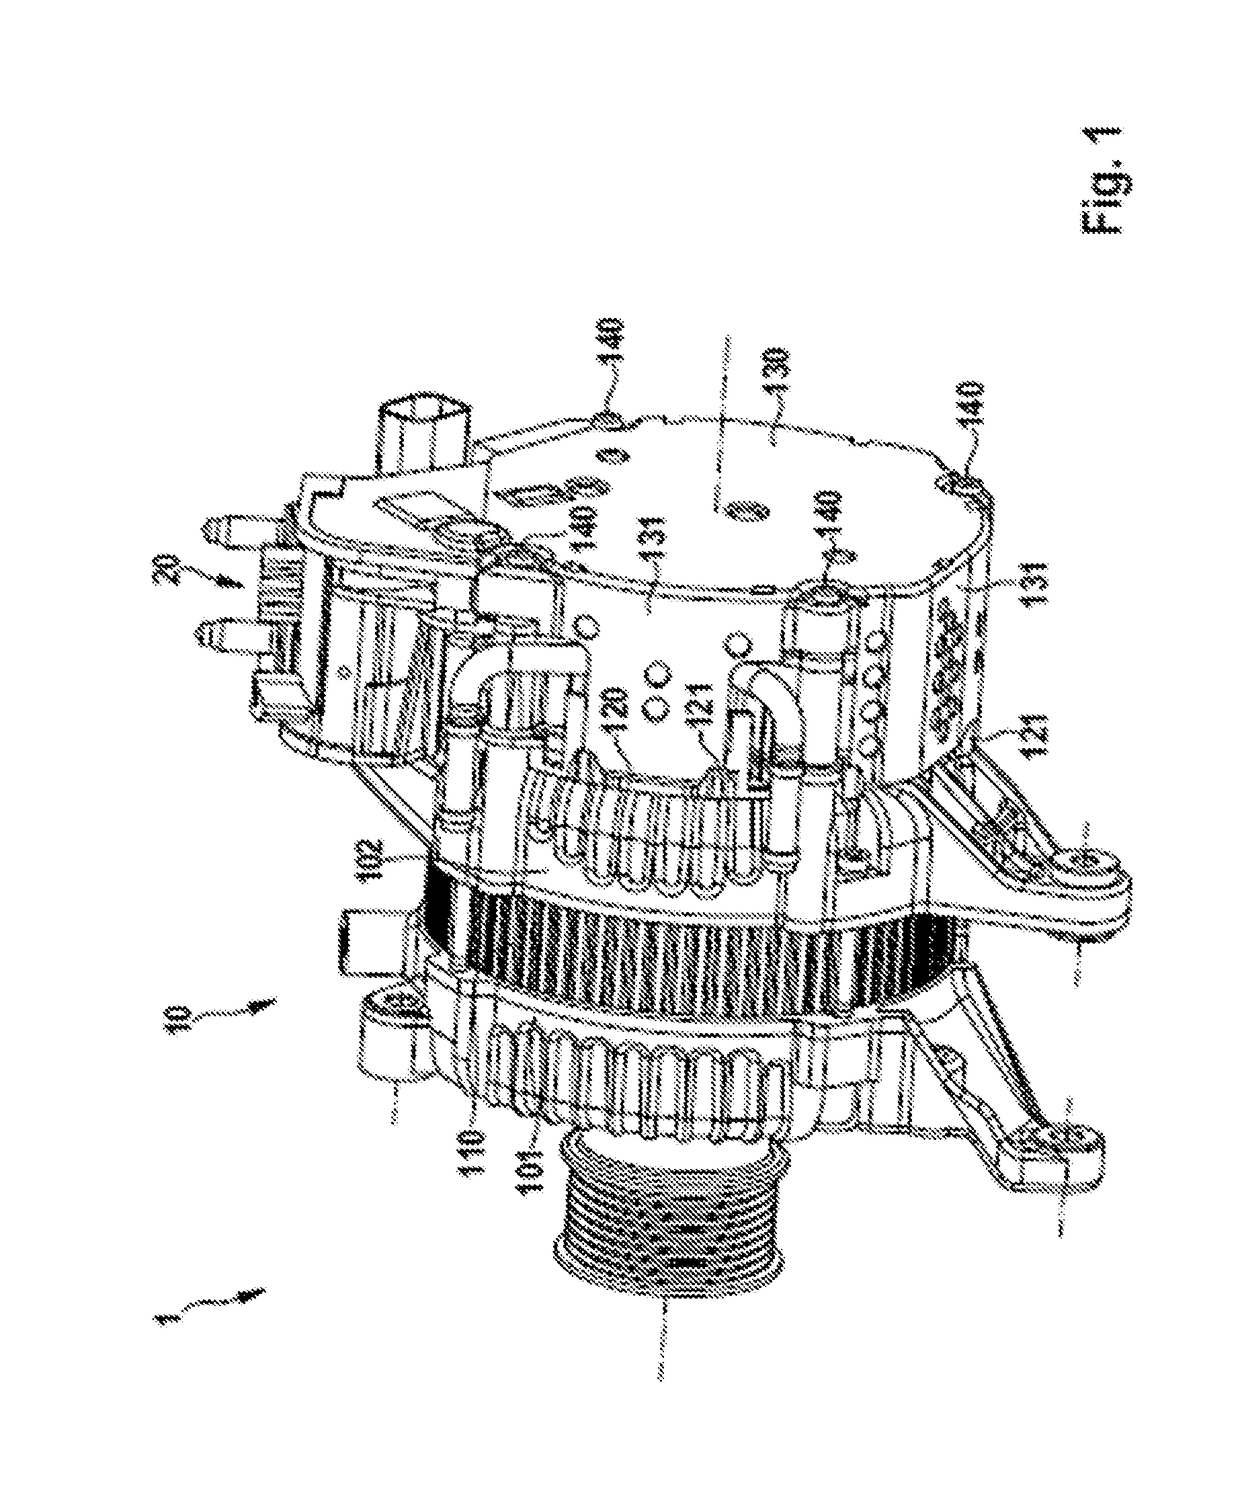 Electric machine unit with groove for receiving a protective cap